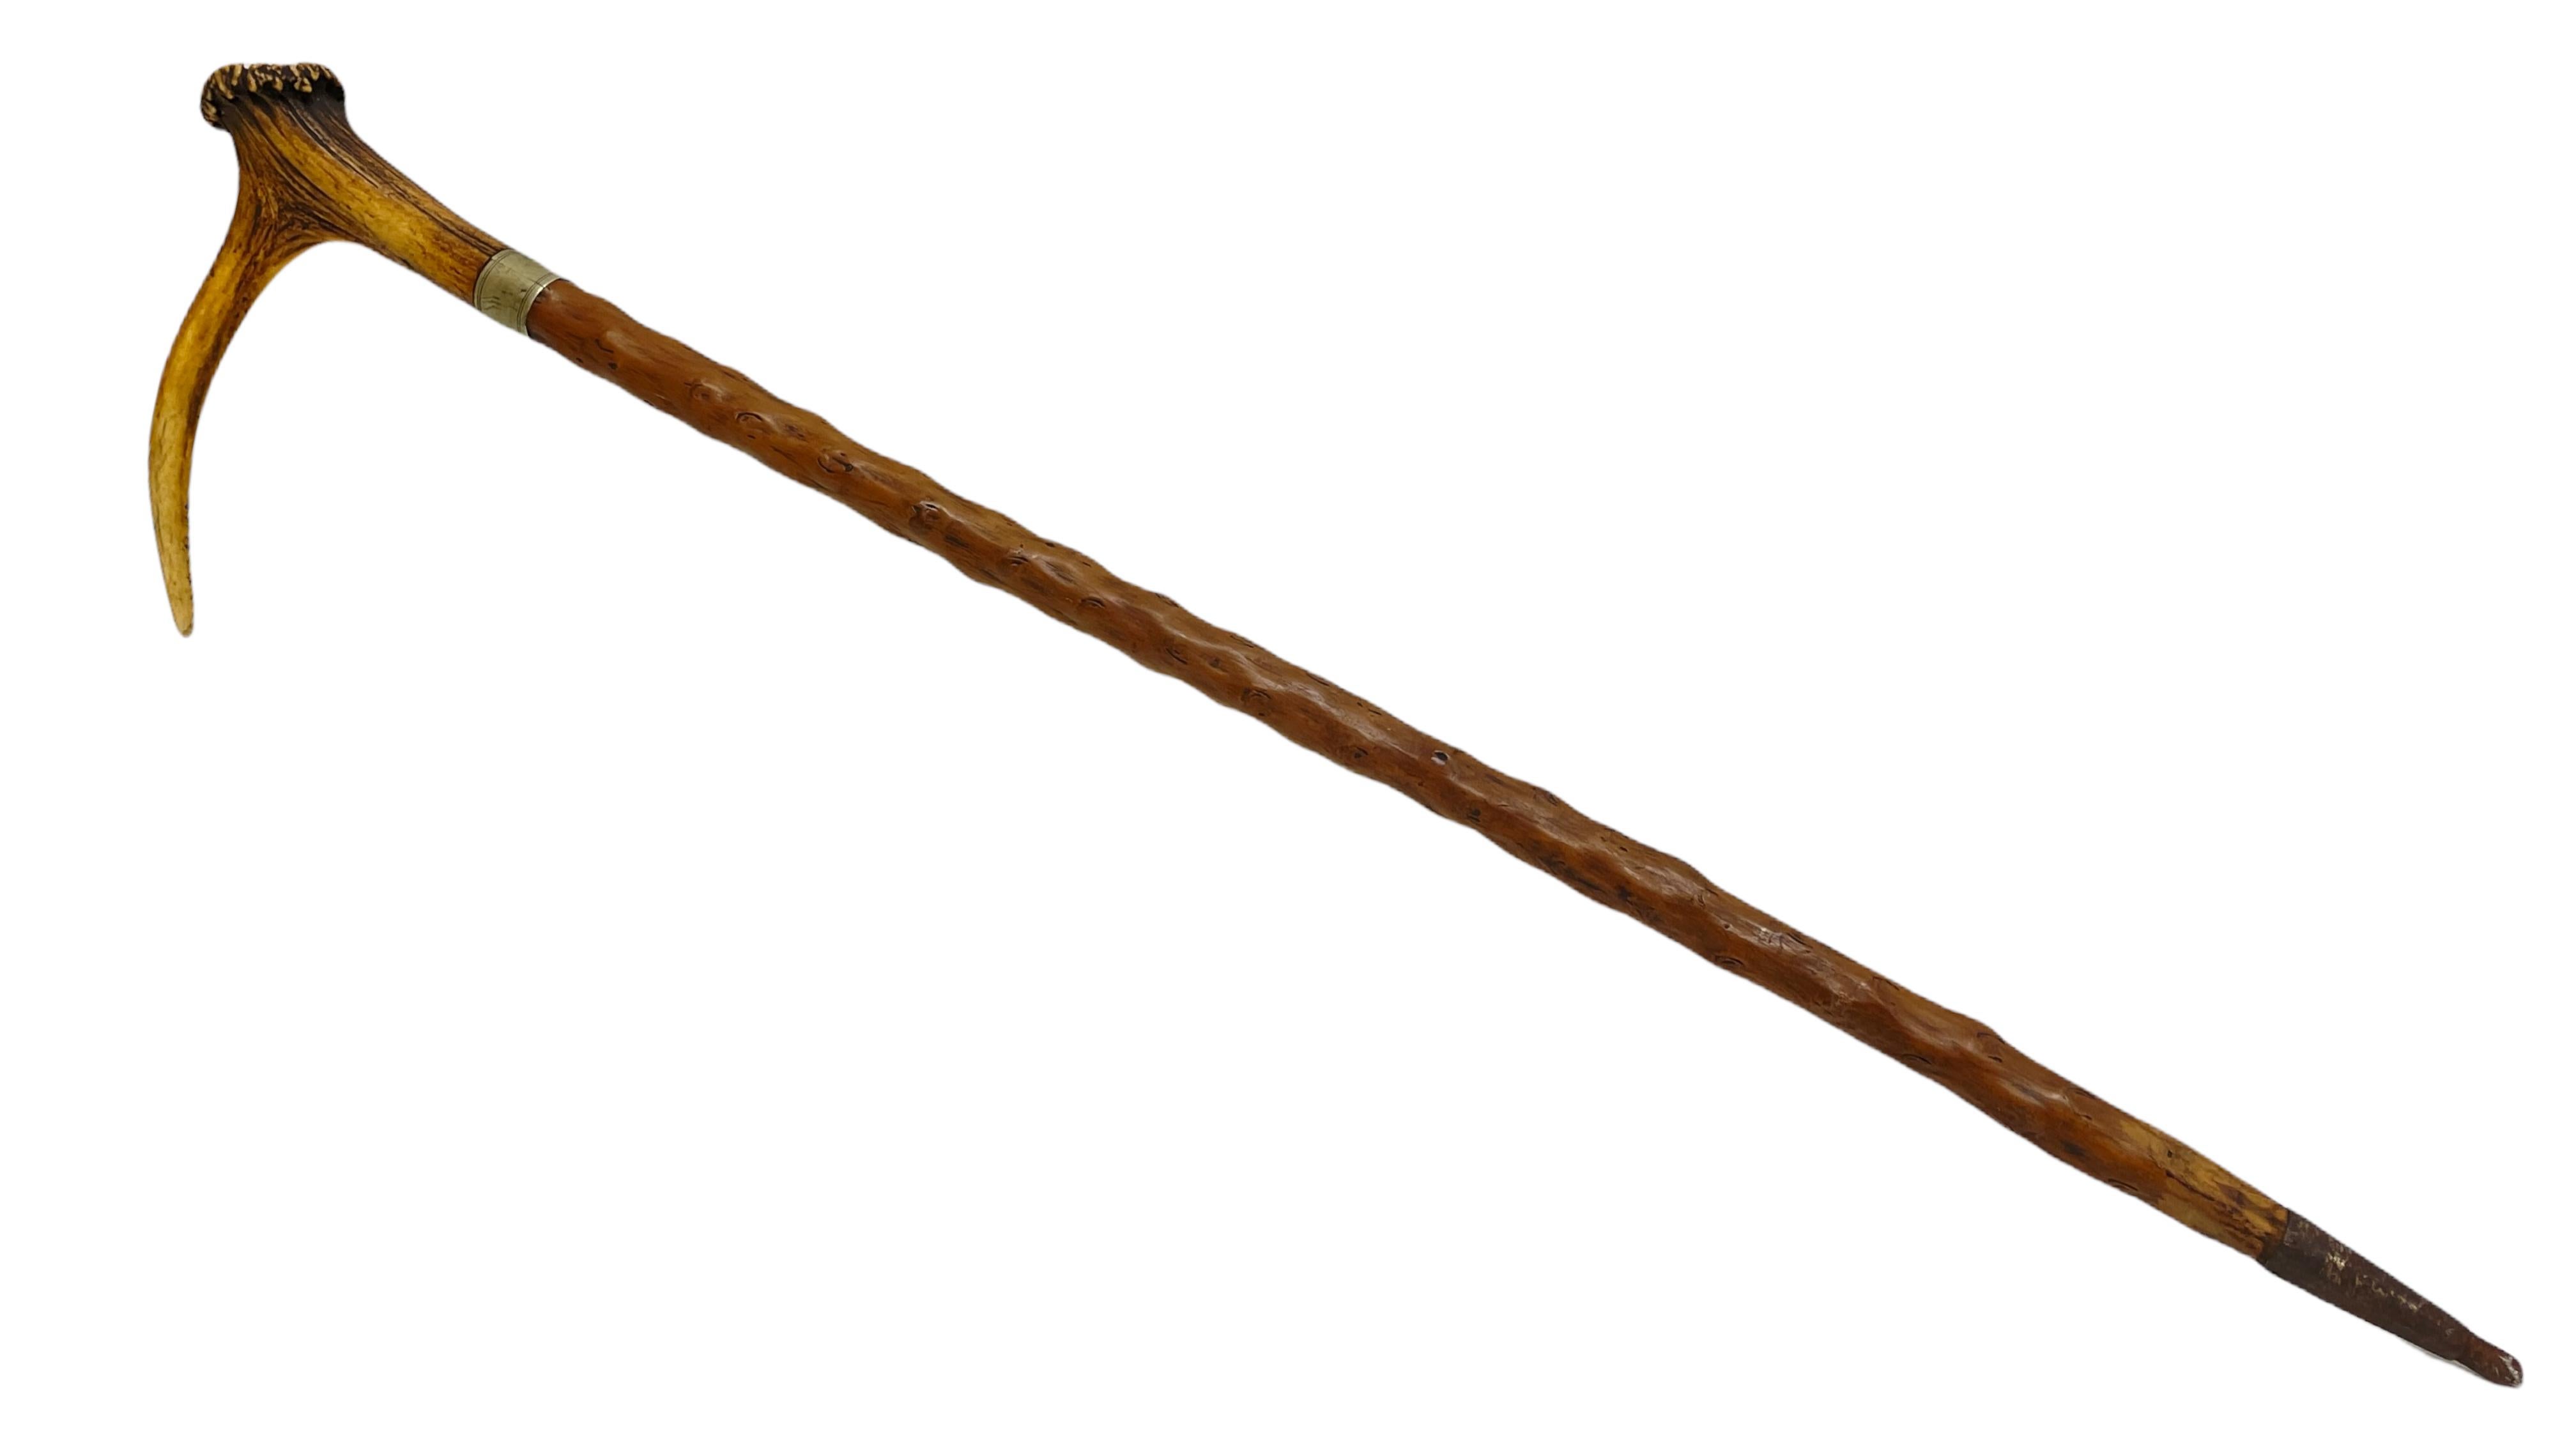 Unique Austrian hunting walking cane from the early 20th century - the walking cane is handmade of blackthorn wood, featuring a deer antler handle with silver chiselled collar.